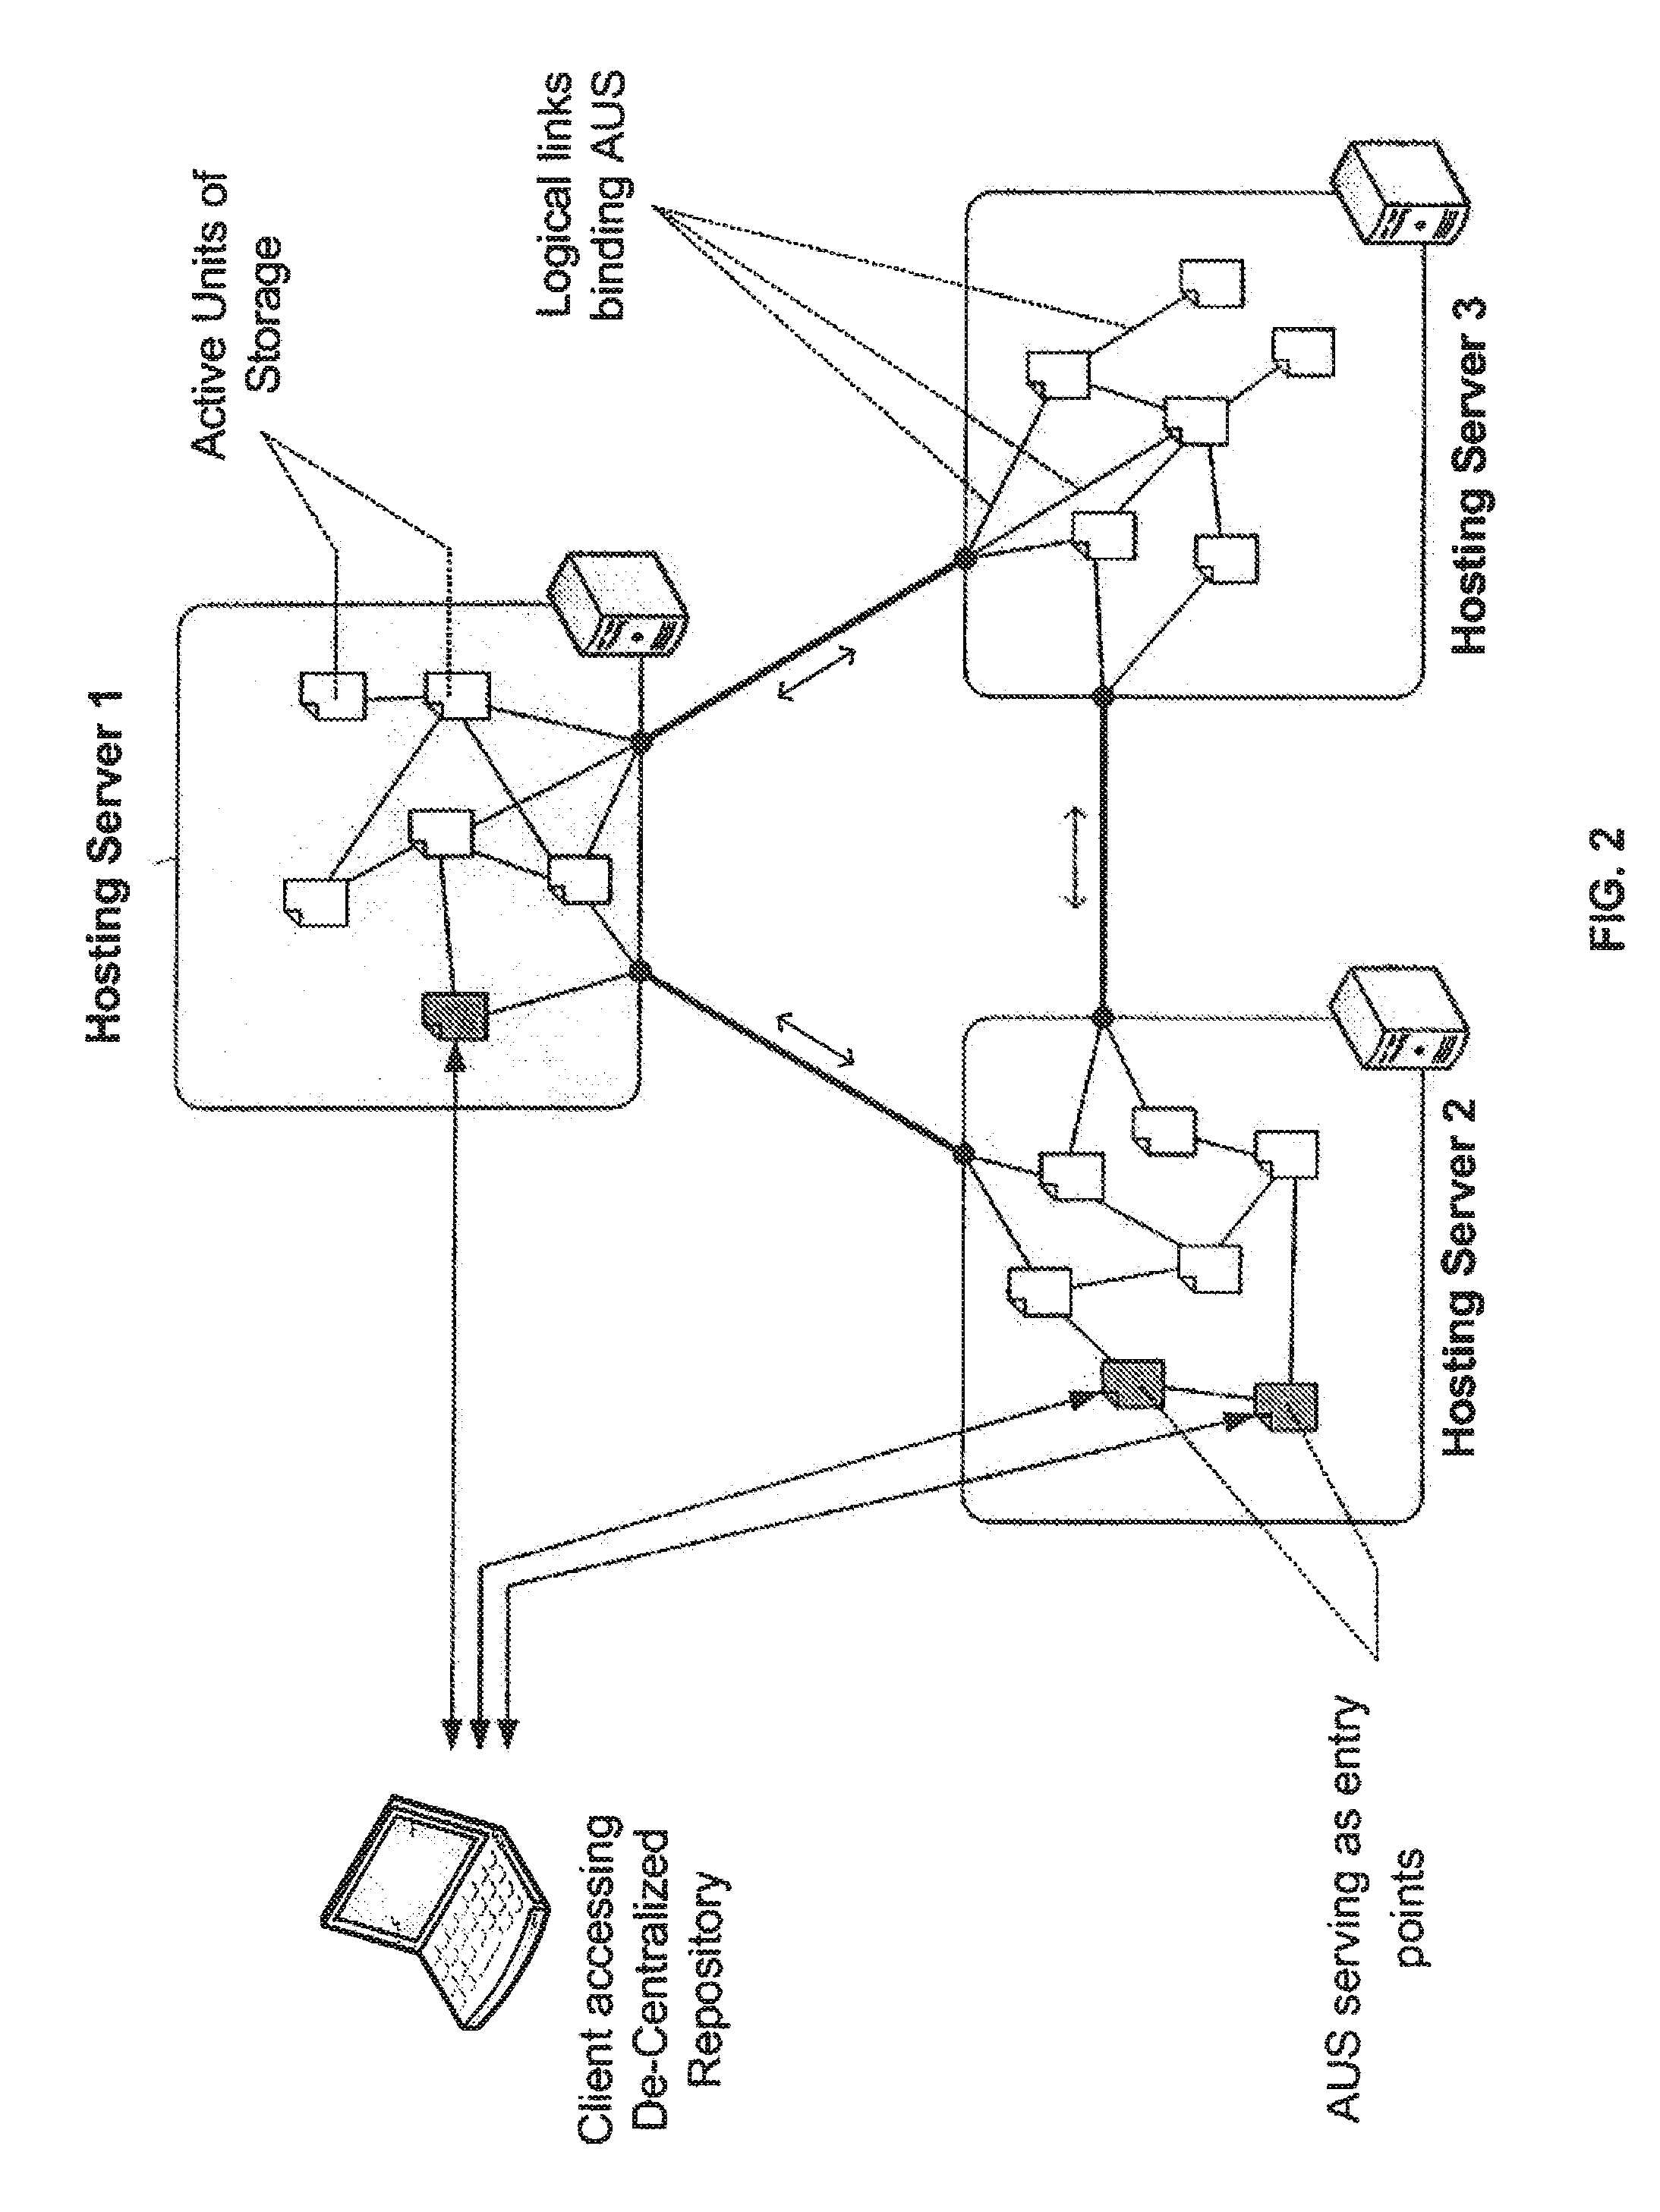 Method and system for storing, searching and retrieving information based on semistructured and de-centralized data sets